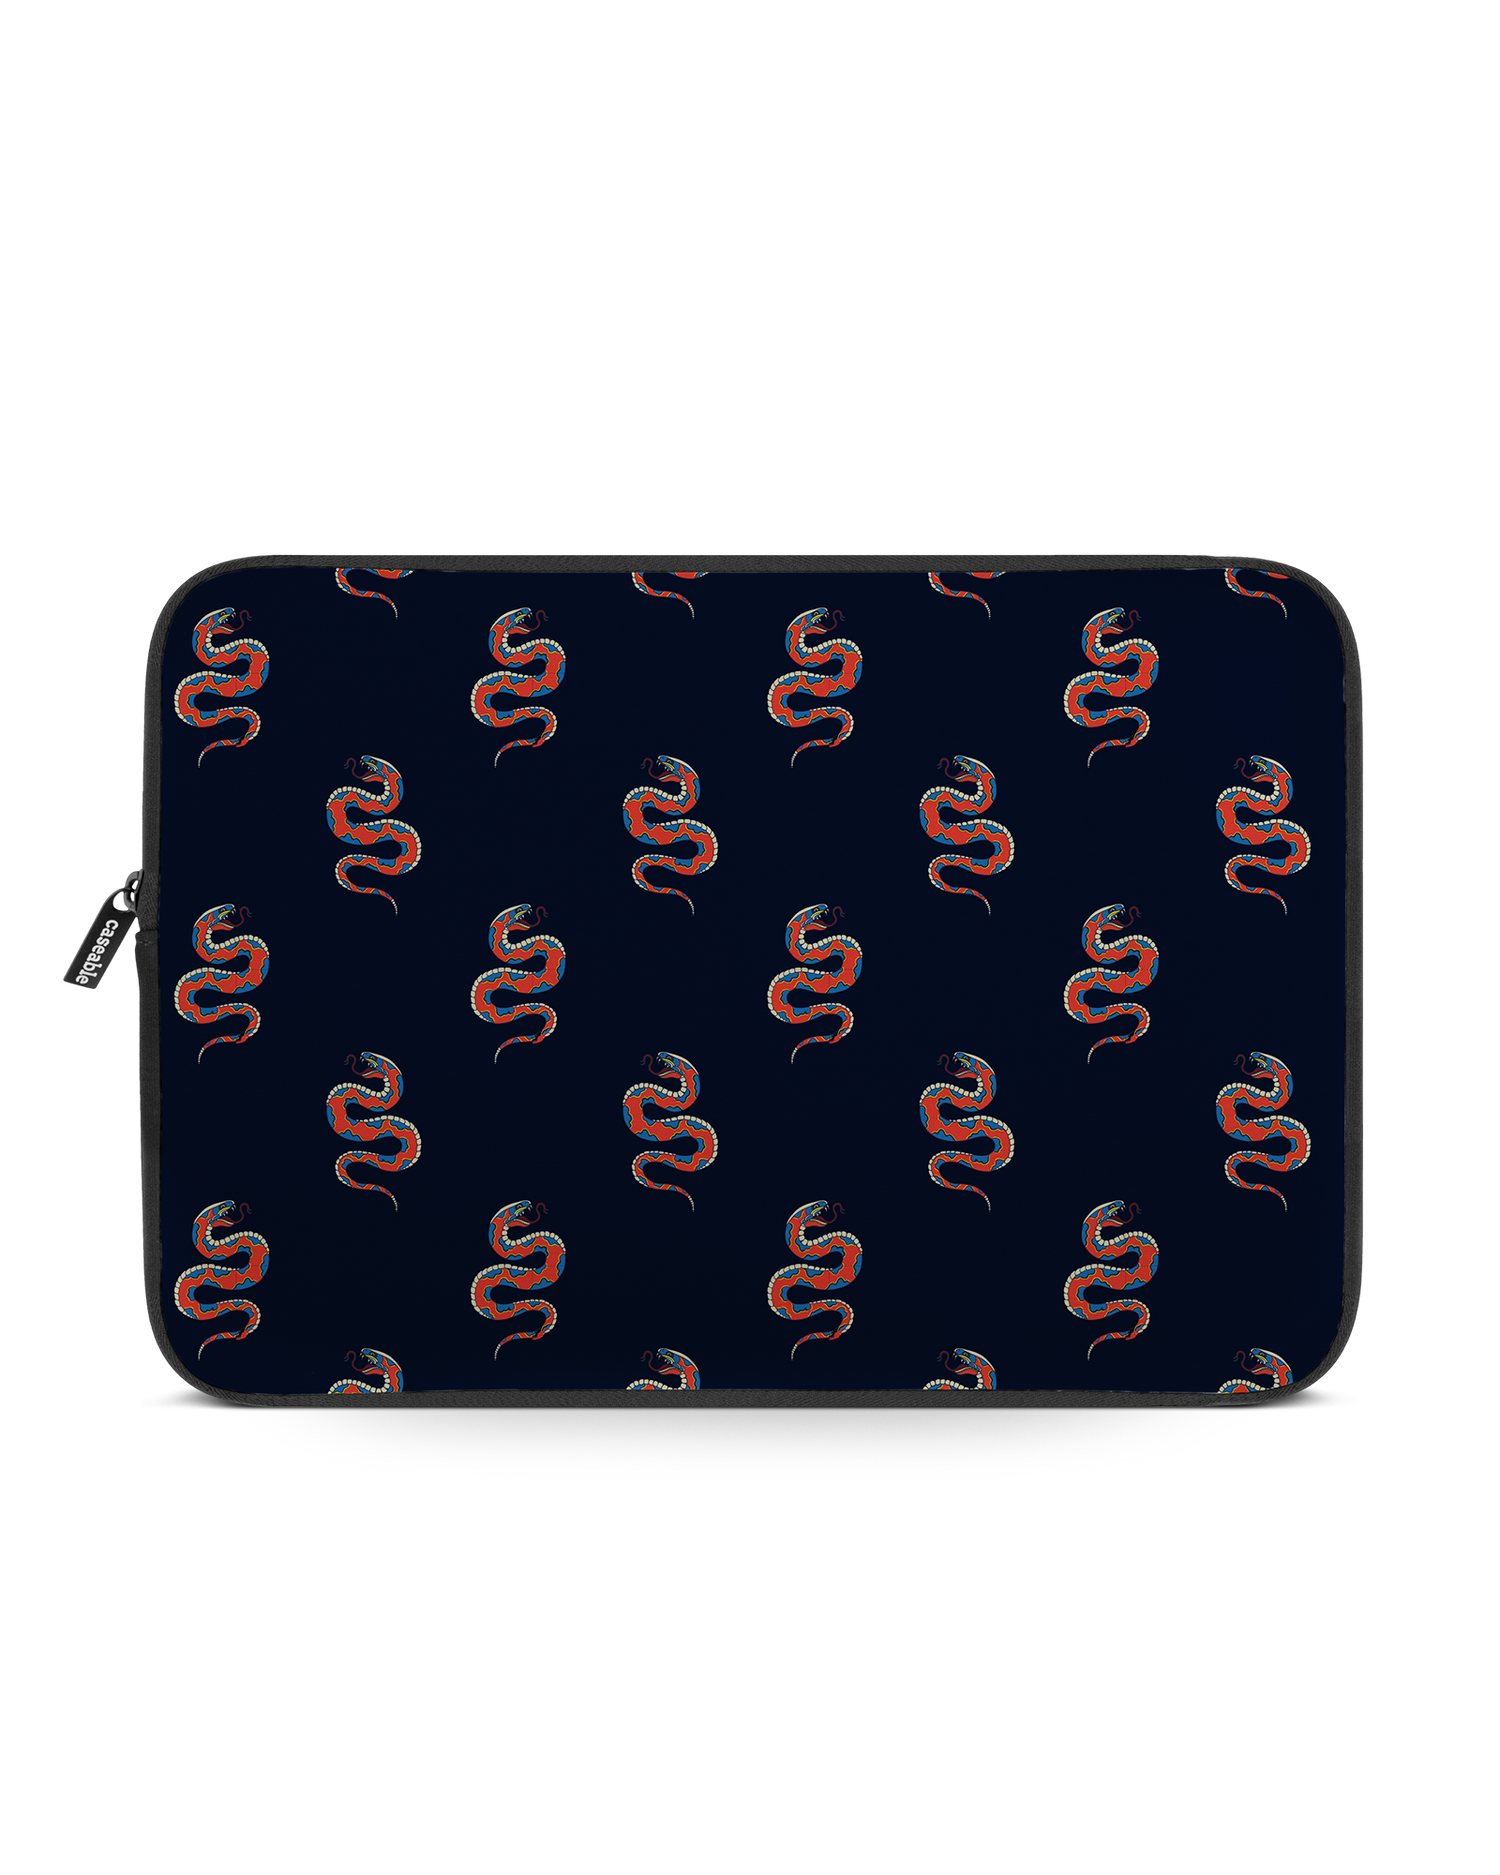 Repeating Snakes Laptop Case 14 inch: Front View